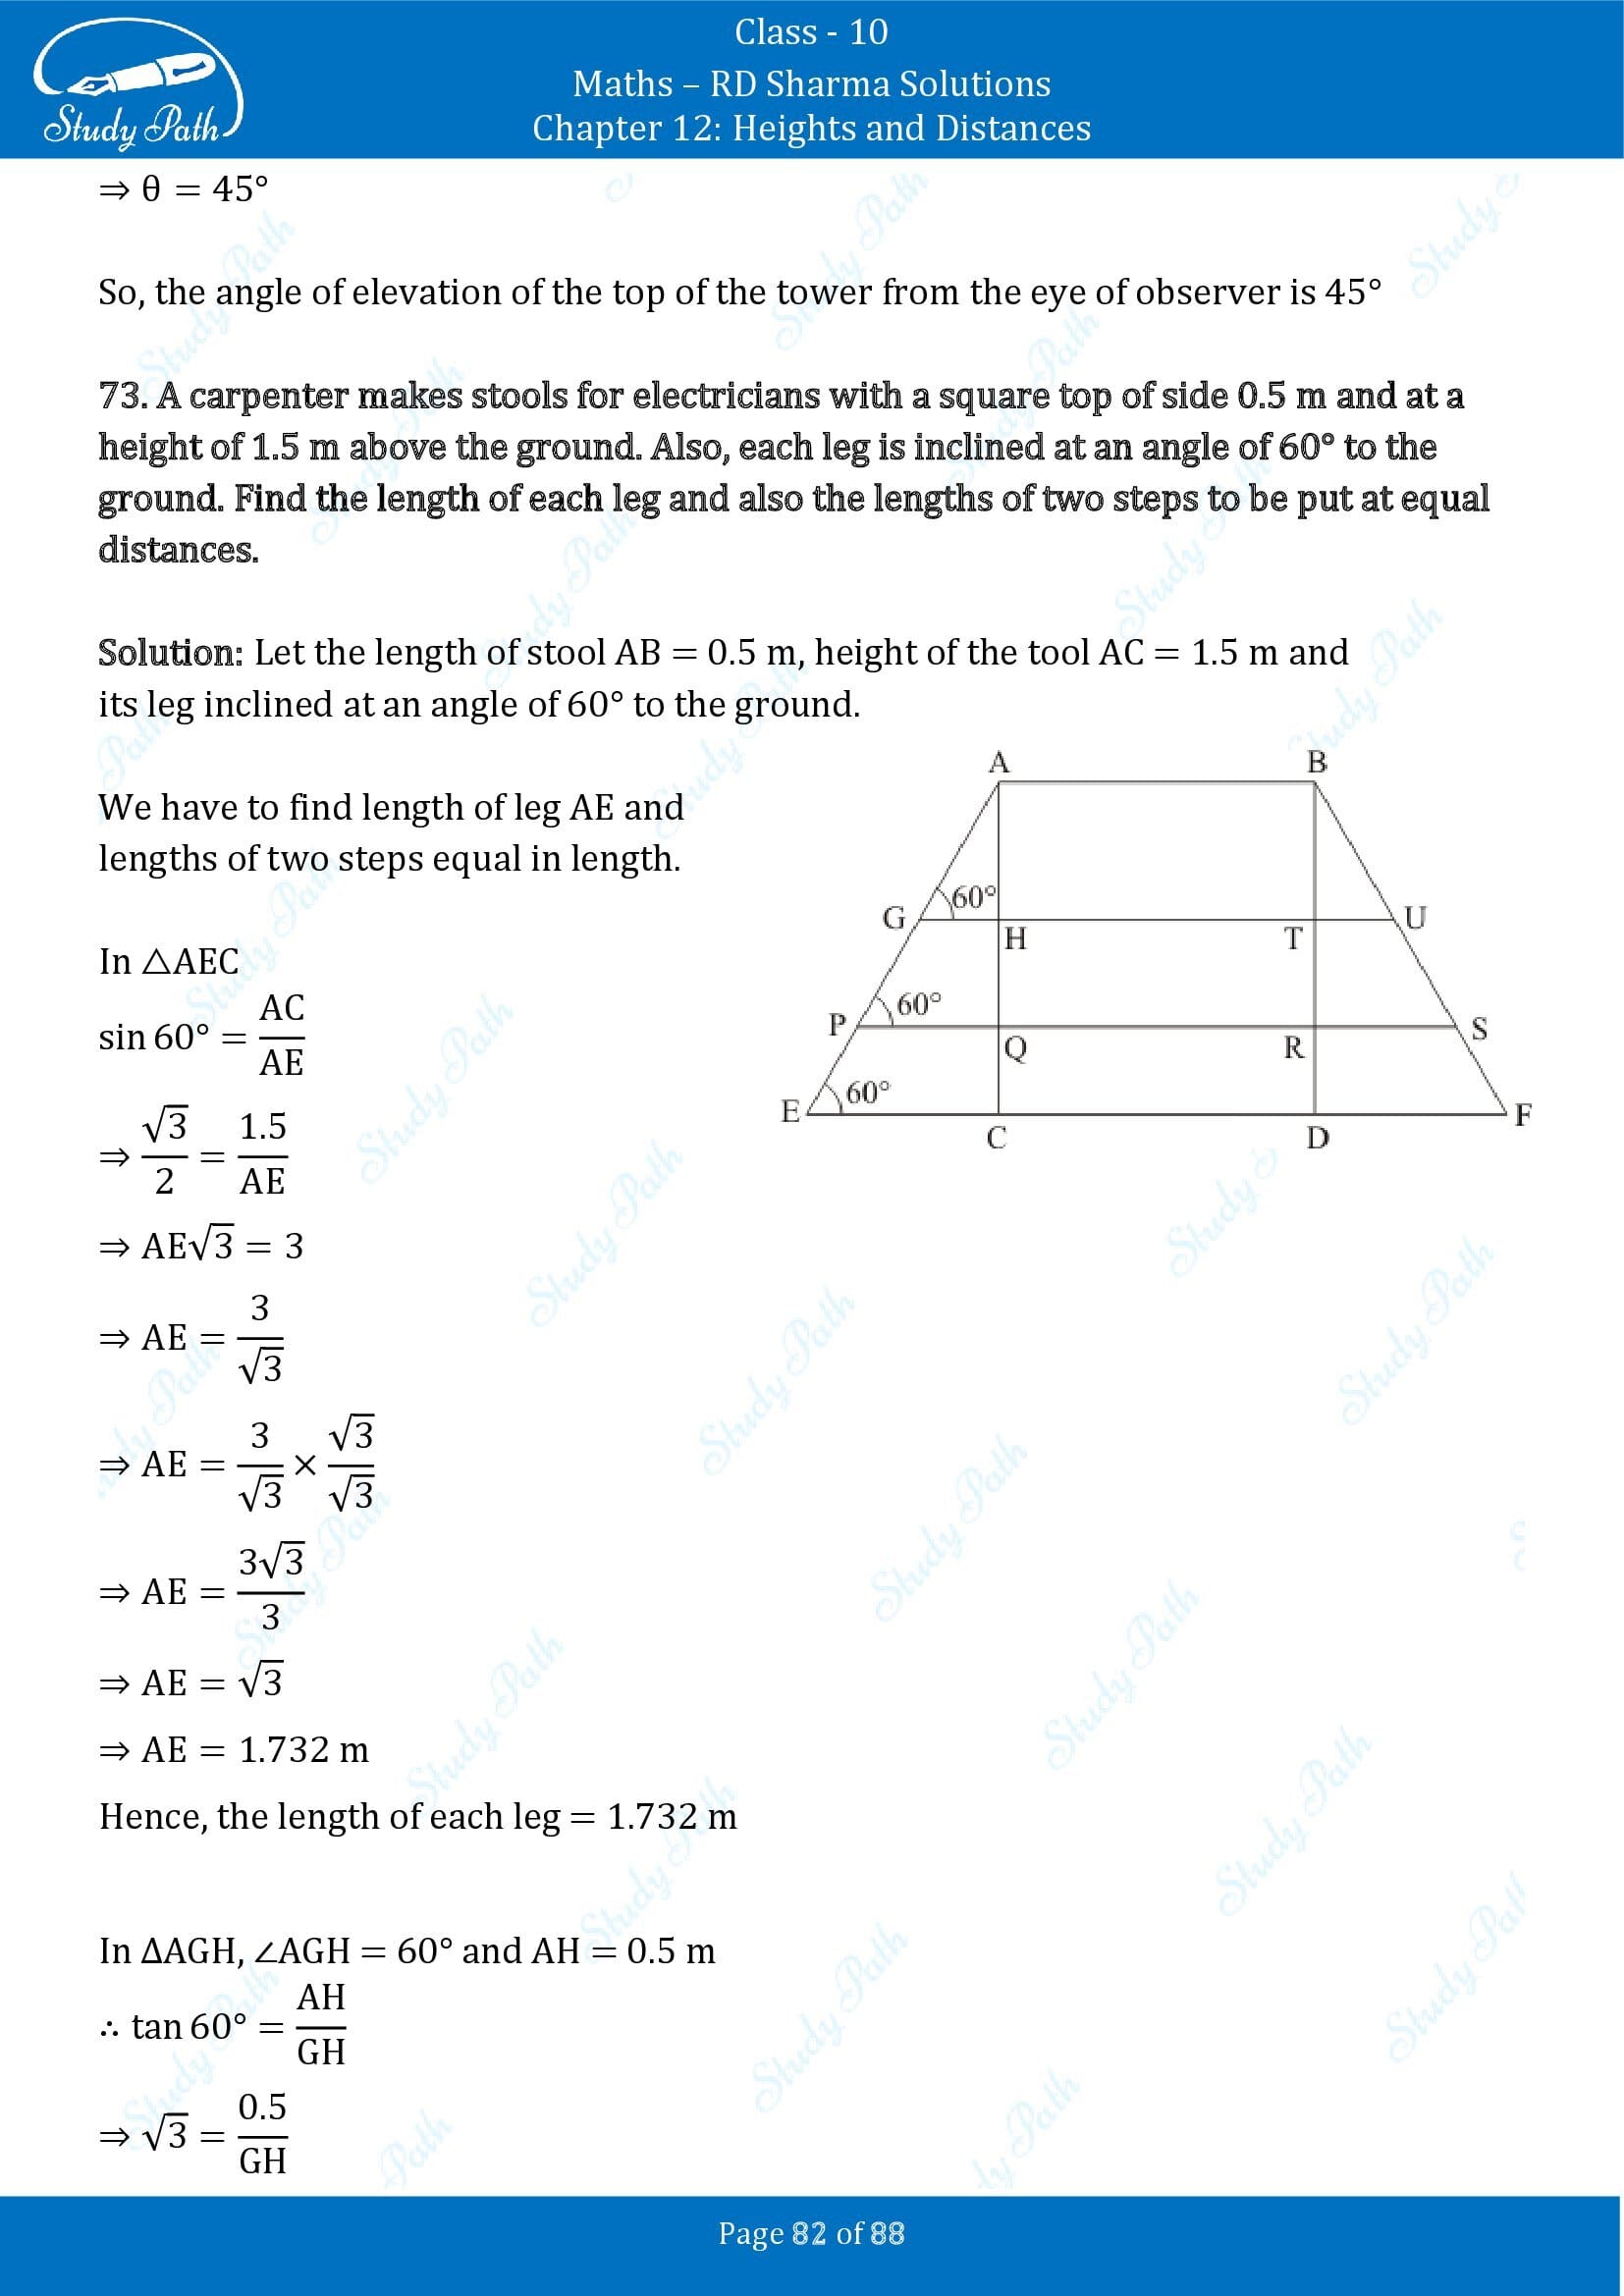 RD Sharma Solutions Class 10 Chapter 12 Heights and Distances Exercise 12.1 00082